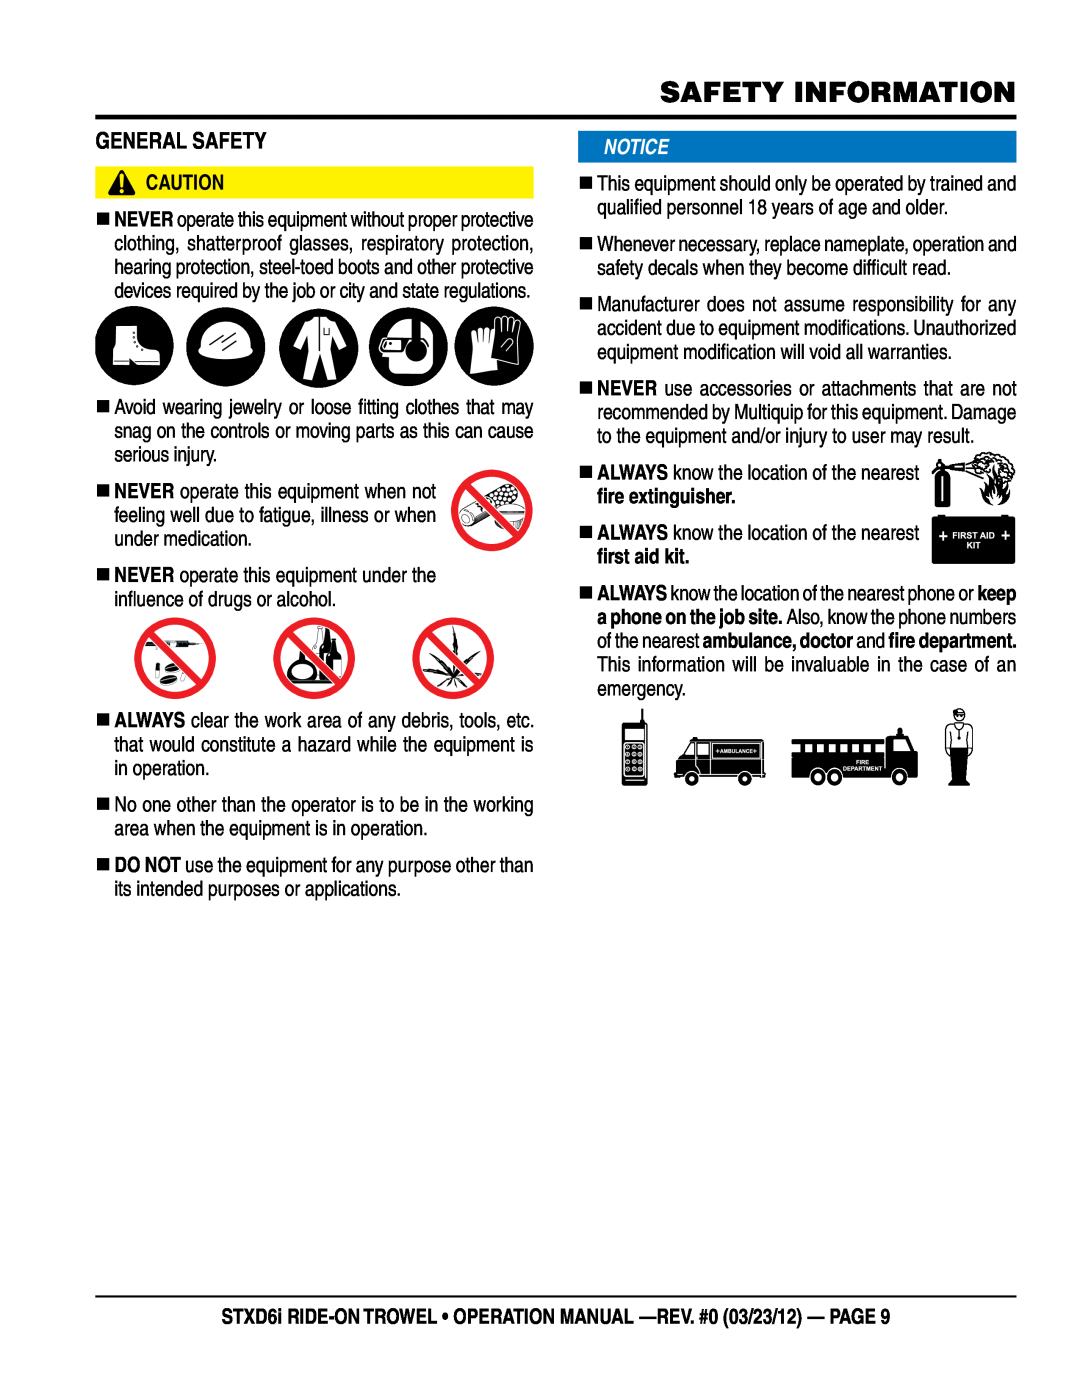 Multiquip geNeRaL safeTy, Safety Information, STXD6i RIDE-ON TROWEL operation manual -rev. #0 03/23/12 - page 